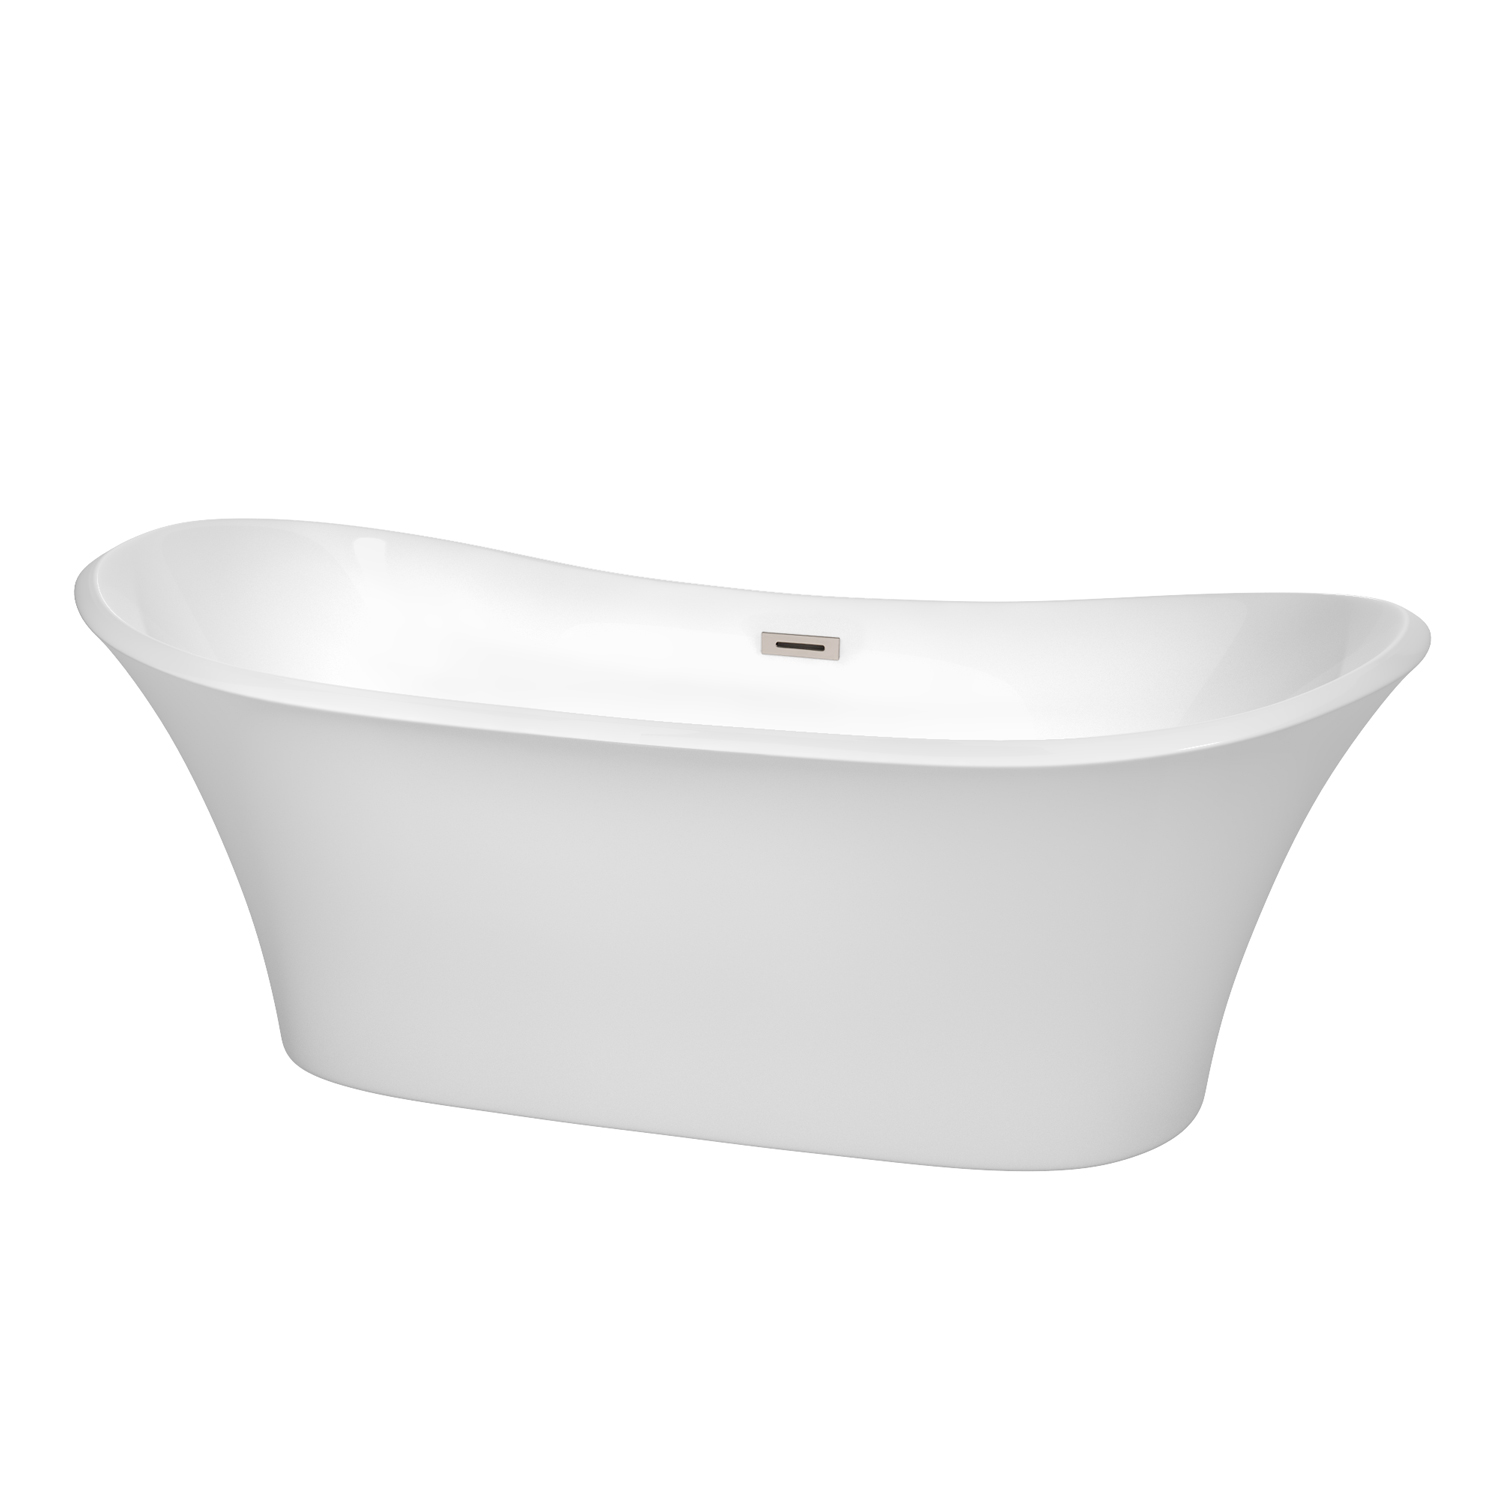 71" Freestanding Bathtub in White with Brushed Nickel Drain and Overflow Trim with Faucet Option